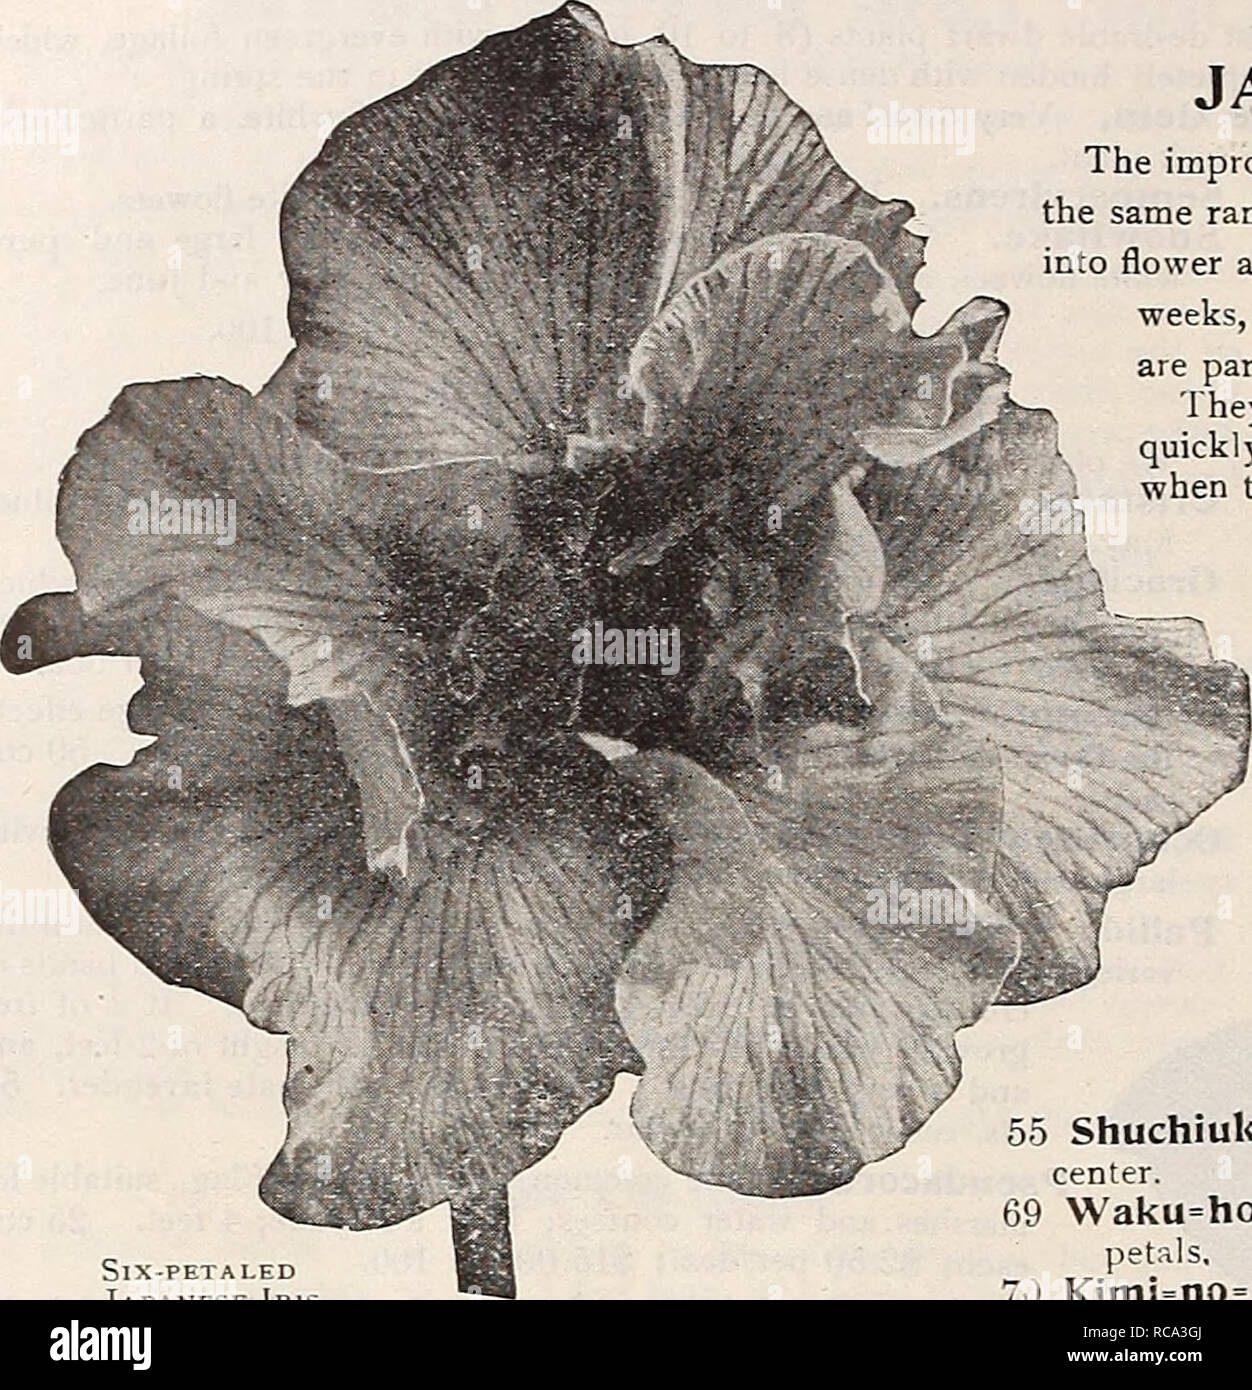 . Dreer's garden book 1919. Seeds Catalogs; Nursery stock Catalogs; Gardening Equipment and supplies Catalogs; Flowers Seeds Catalogs; Vegetables Seeds Catalogs; Fruit Seeds Catalogs. SlX-PETALED Japanese 1ri No. 105 Nagano. petals. 109 Hosokawa. Light violet-blue, veined white, six petals DREER'S IMPERIAL JAPANESE IRIS (iris K^mpferl) The improved forms of this beautiful flower have placed them in the same rank popularly as the Hardy Phloxes and Peonies. Coming into flower about the middle of June and continuing for five or six weeks, they fill in a period when flowers of this attractive type Stock Photo